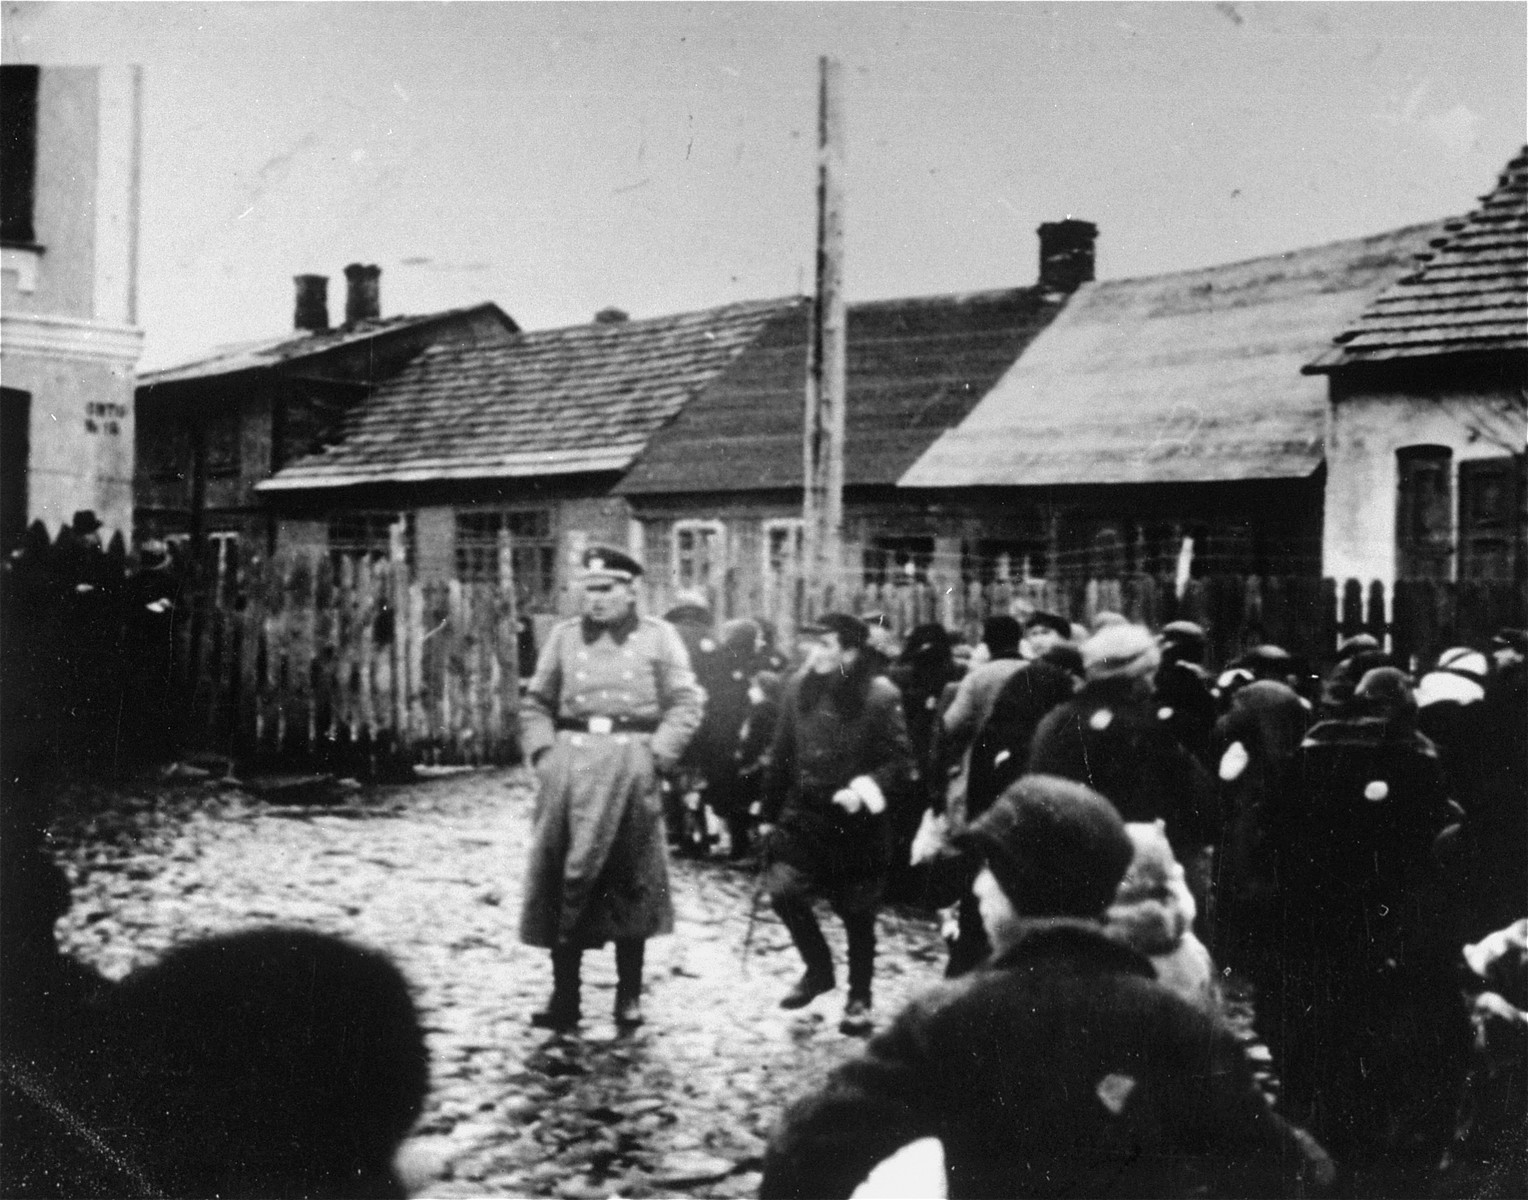 A German police officer stands in a fenced-in yard among a group of Jews, who have been rounded-up in the Ciechanow ghetto.